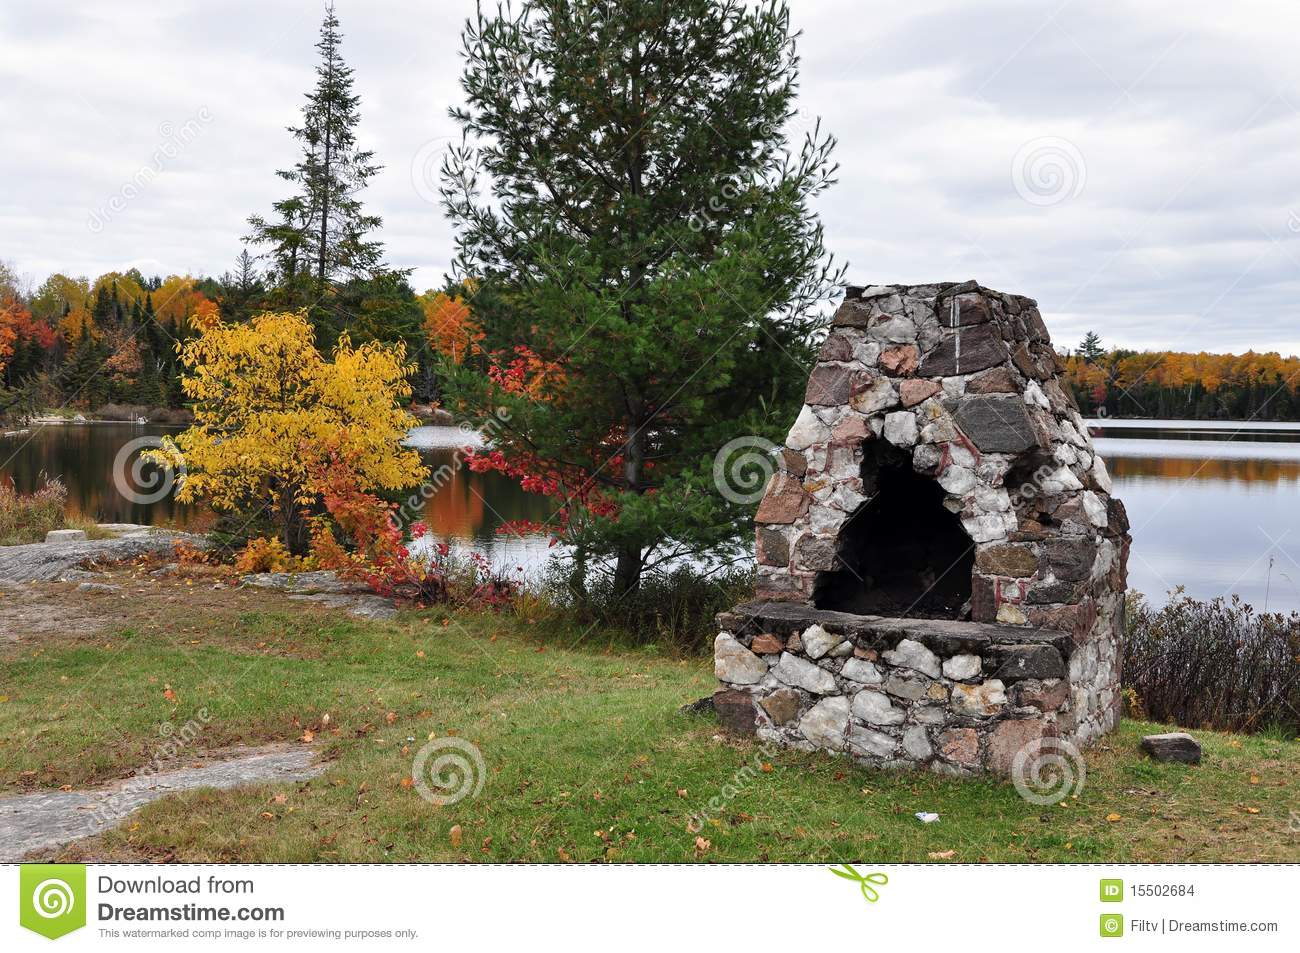 Outdoor Fireplace Stock Images   Image  15502684